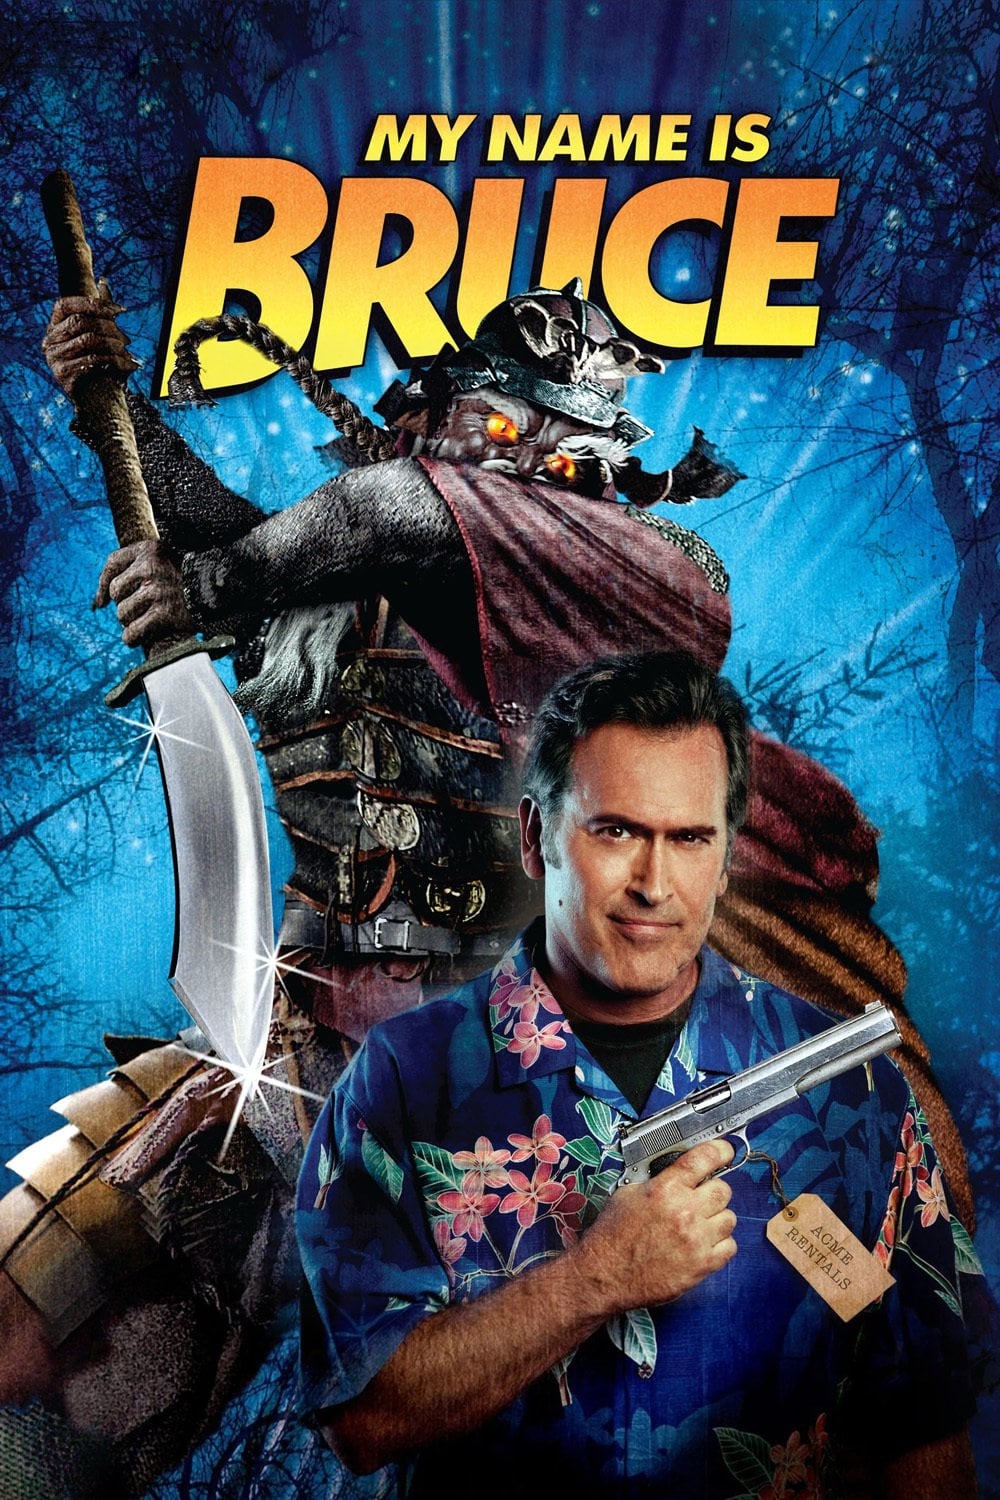 My Name Is Bruce film